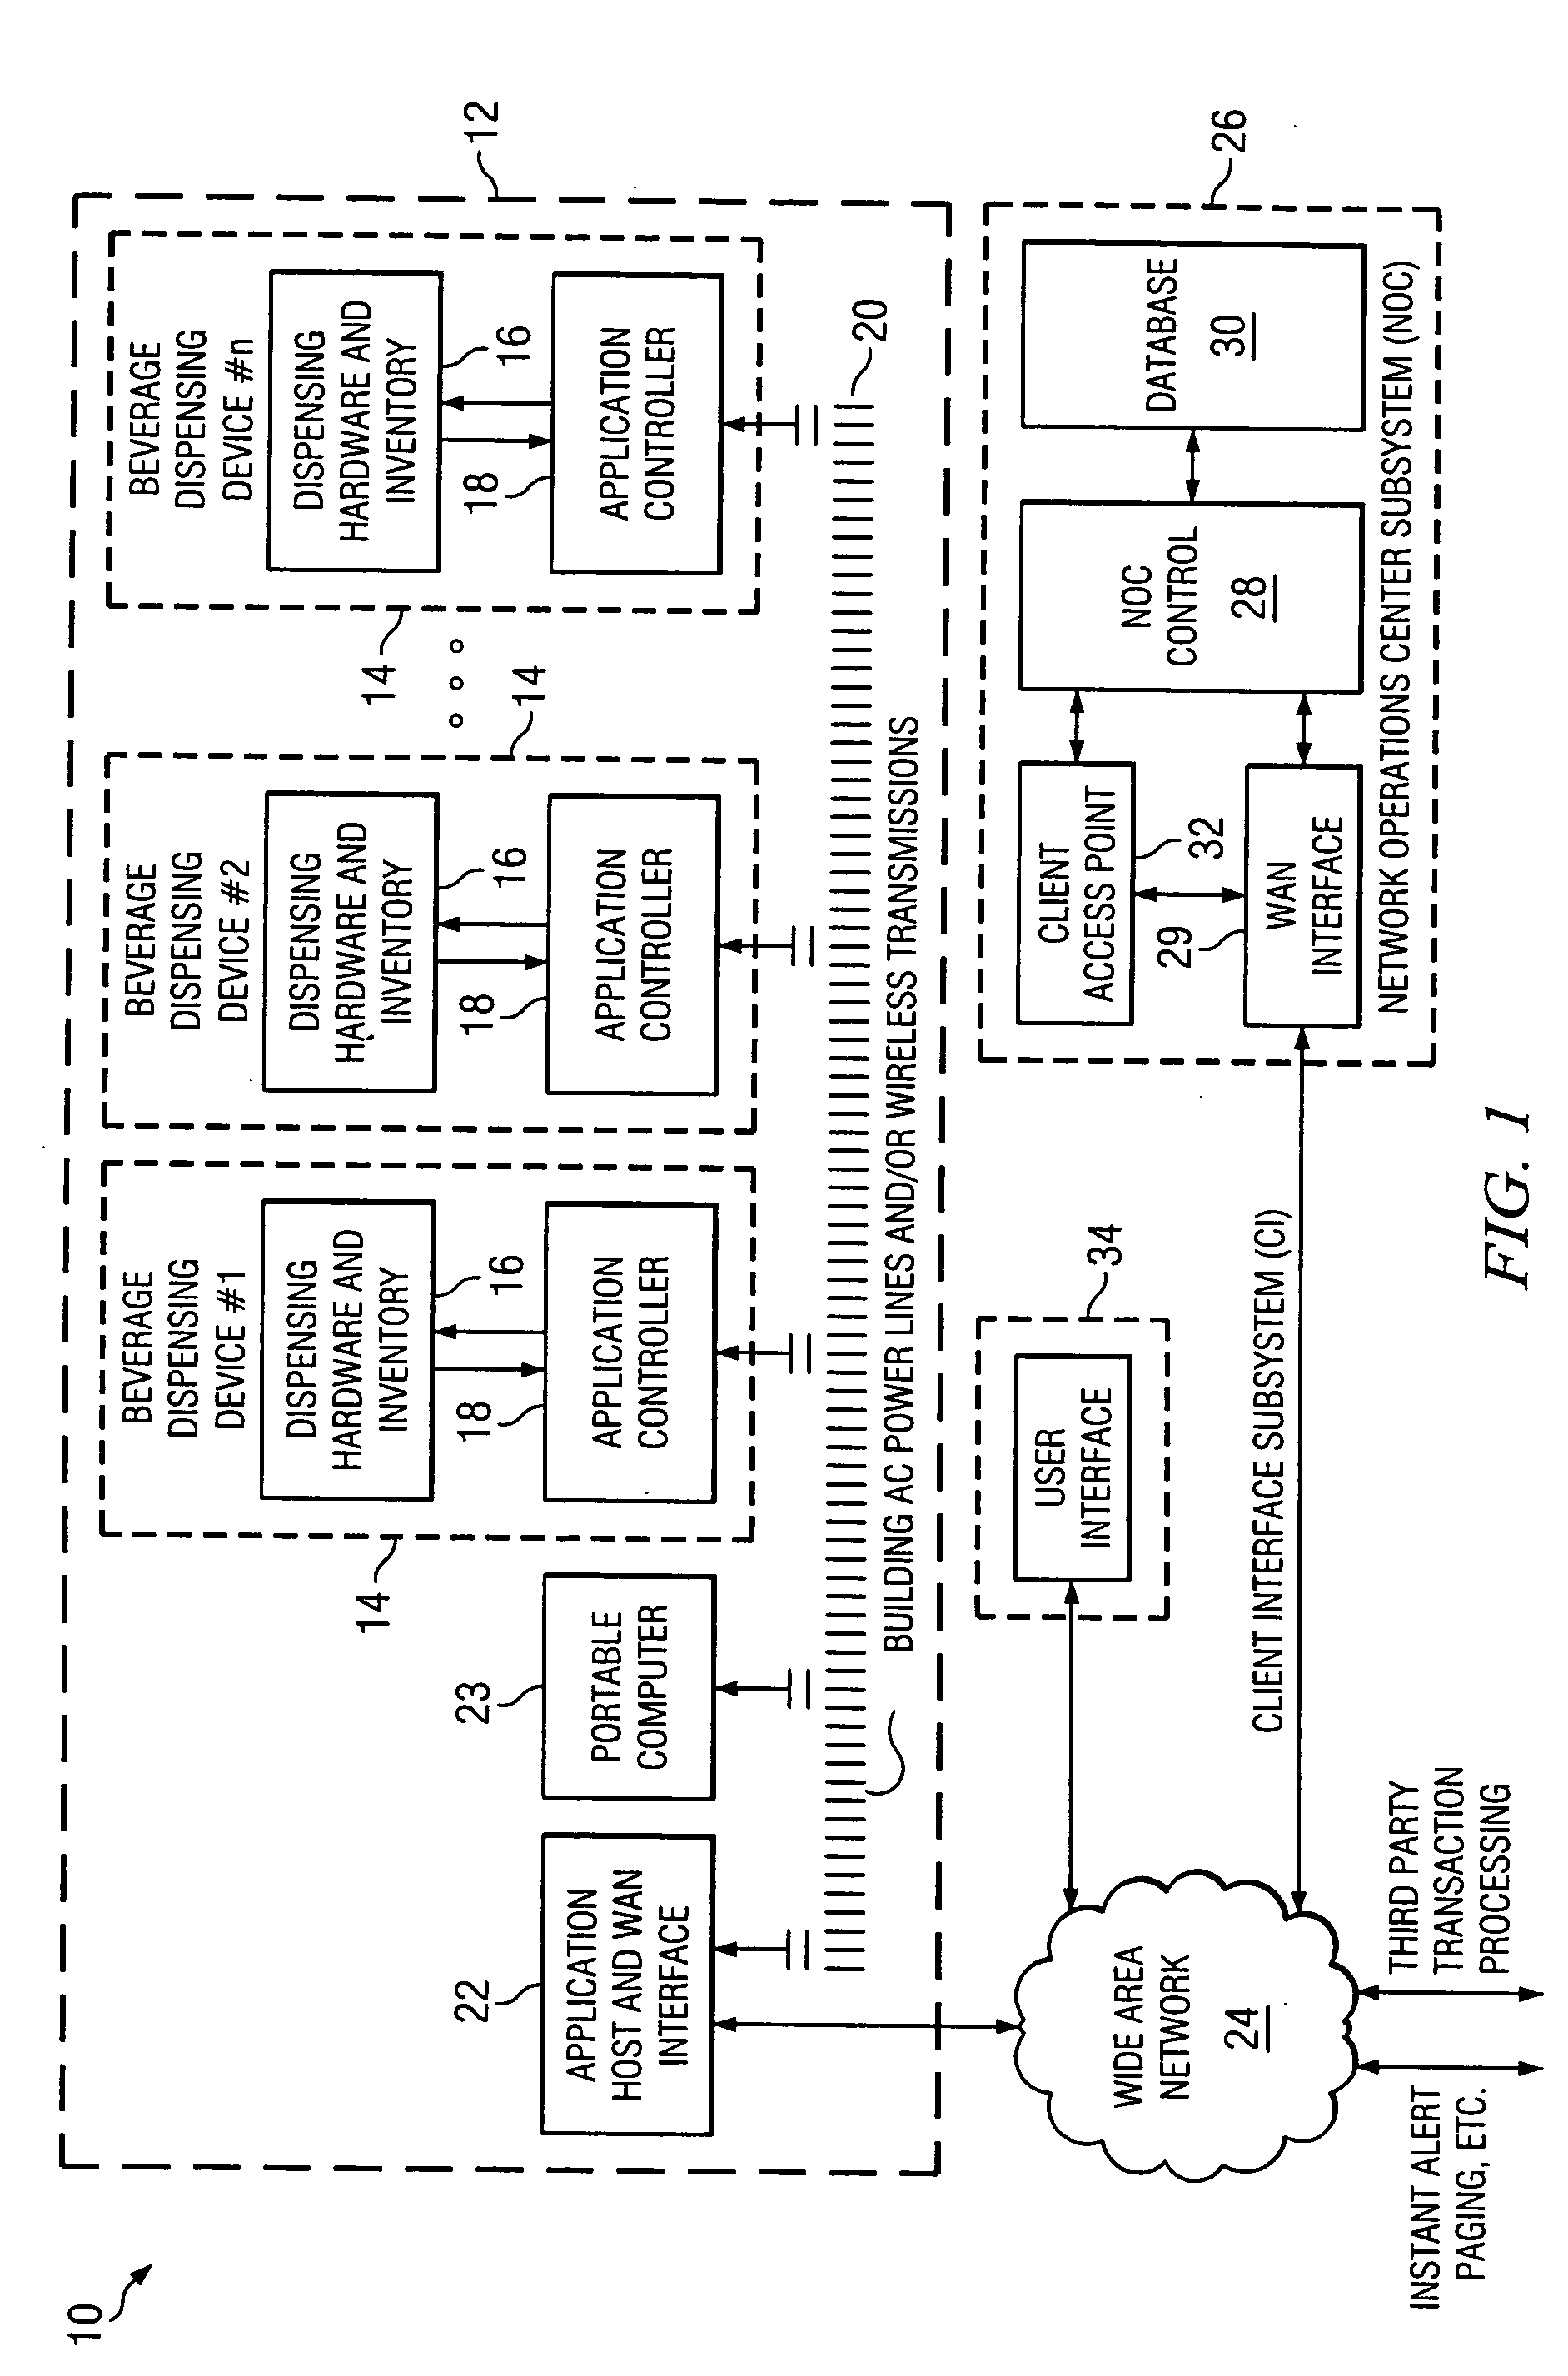 System and method for monitoring and control of beverage dispensing equipment